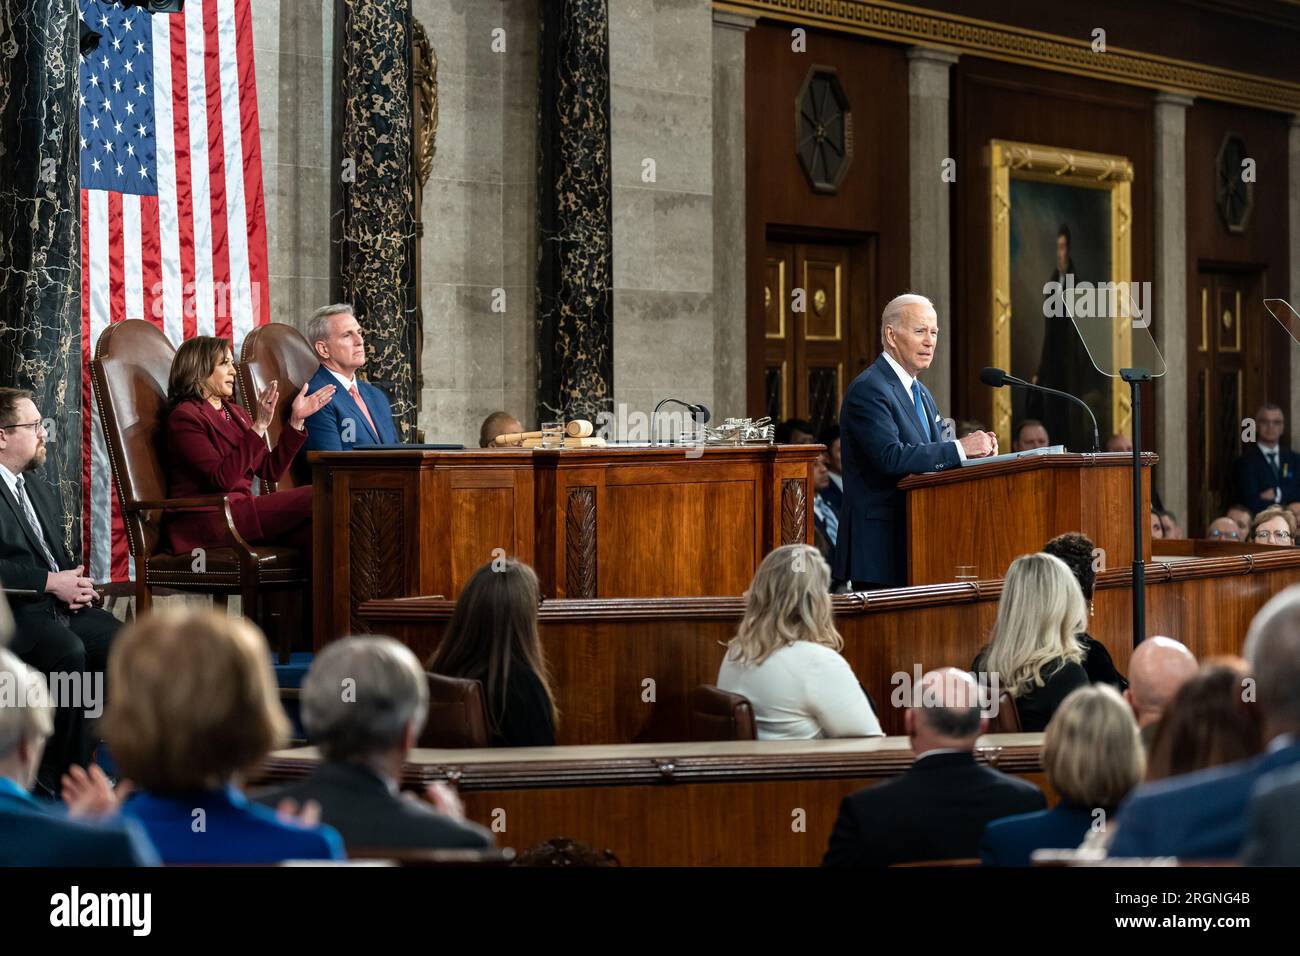 Reportage: President Biden's 2023 State of the Union Address - President Joe Biden delivers his State of the Union address, Tuesday, February 7, 2023, on the House floor of the U.S. Capitol Stock Photo